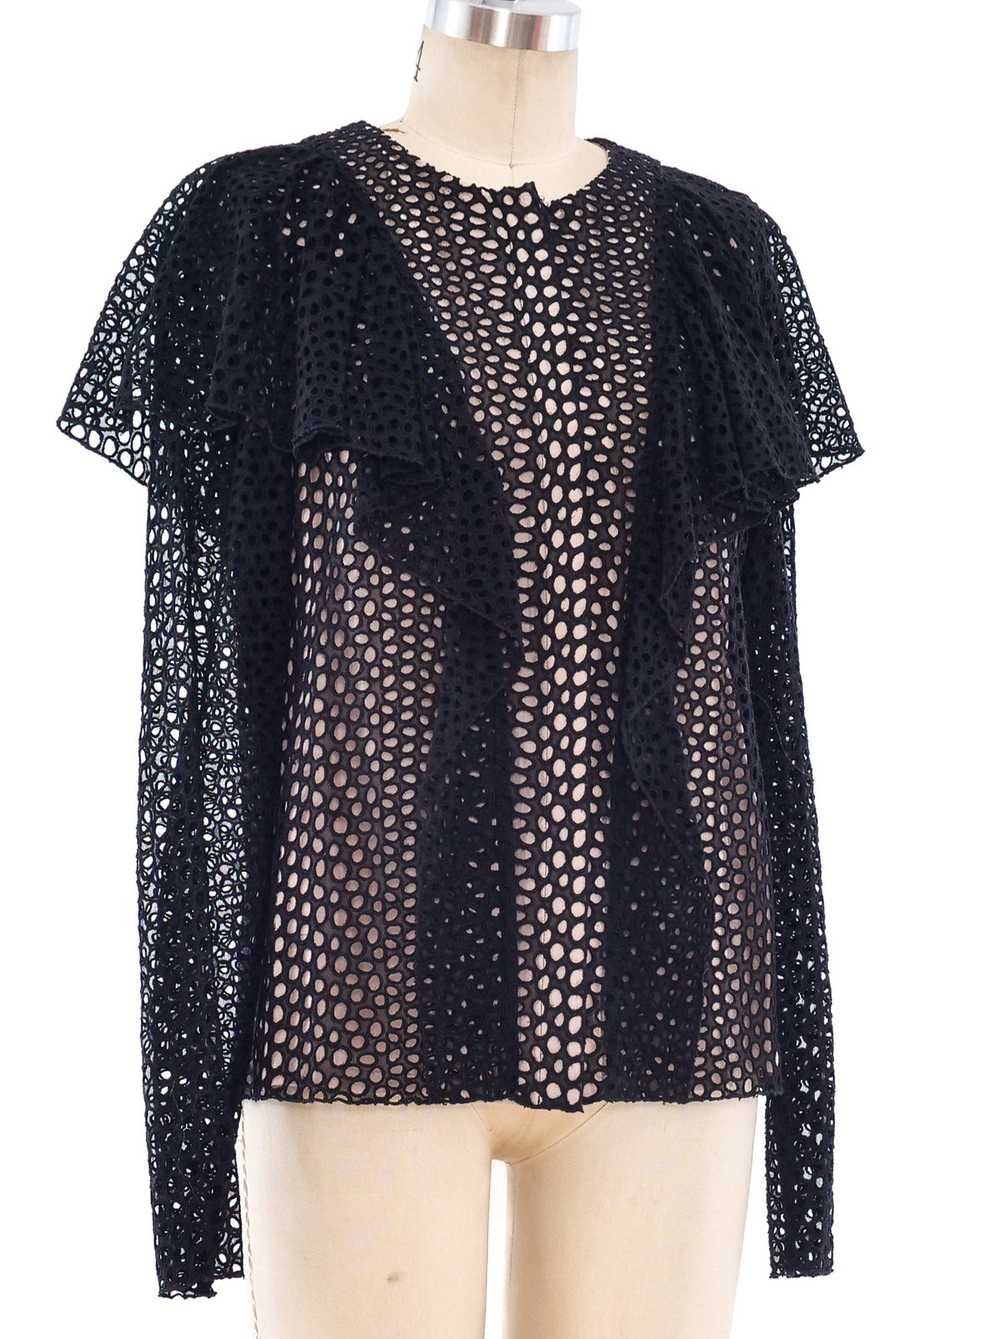 Lanvin Eyelet Button Front Top - image 2